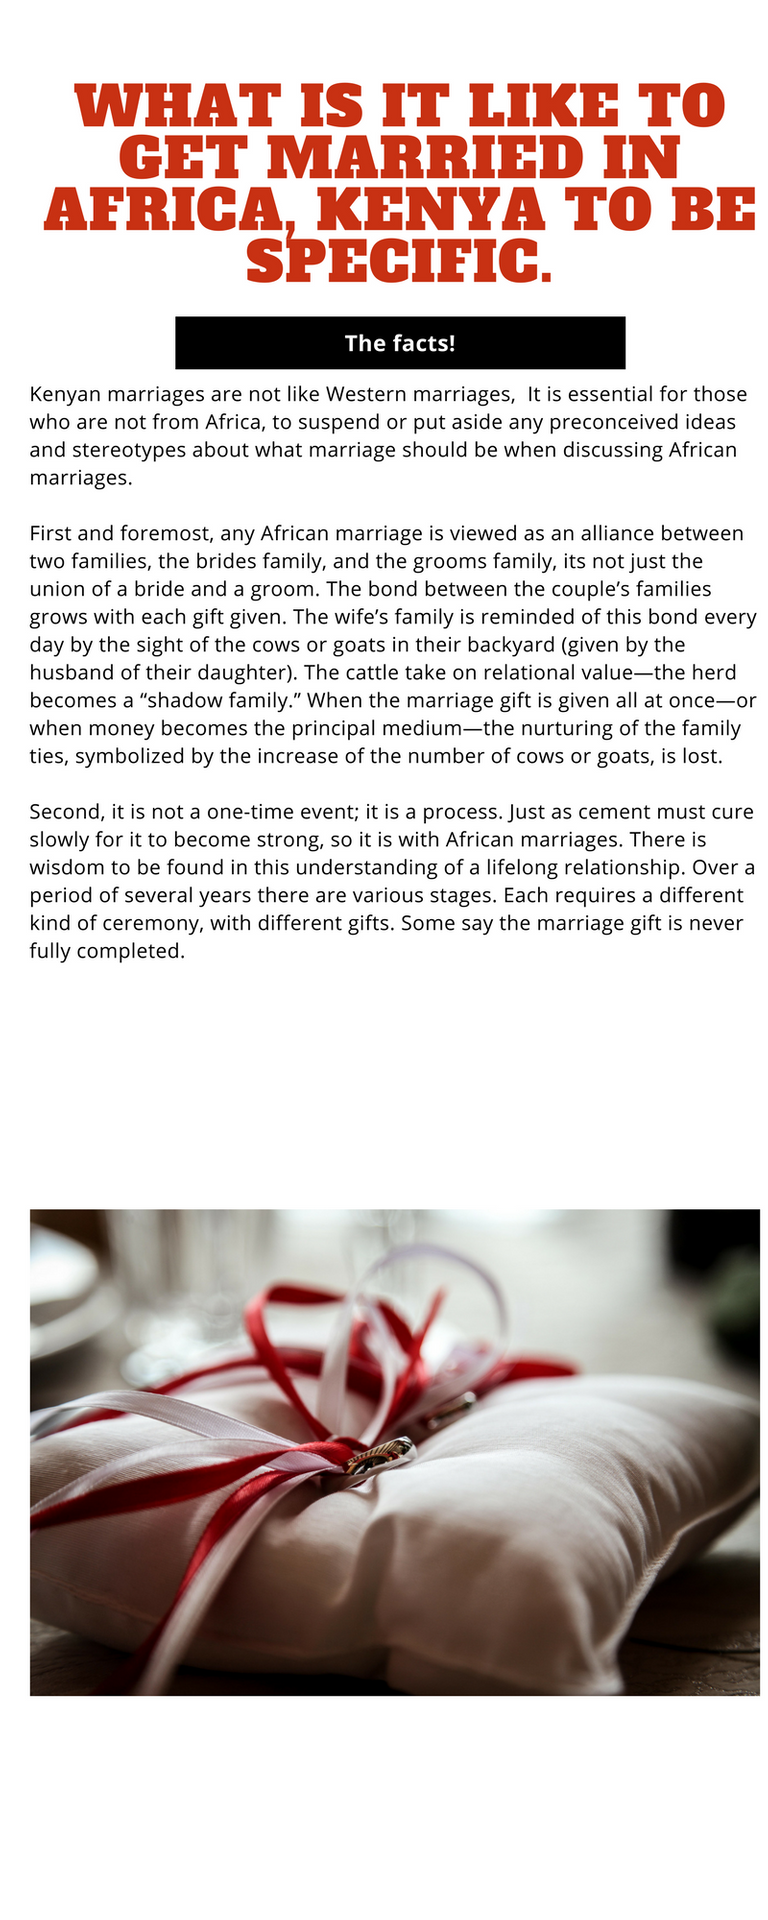 WHAT IS IT LIKE TO GET MARRIED IN AFRICA, KENYA TO BE SPECIFIC..png